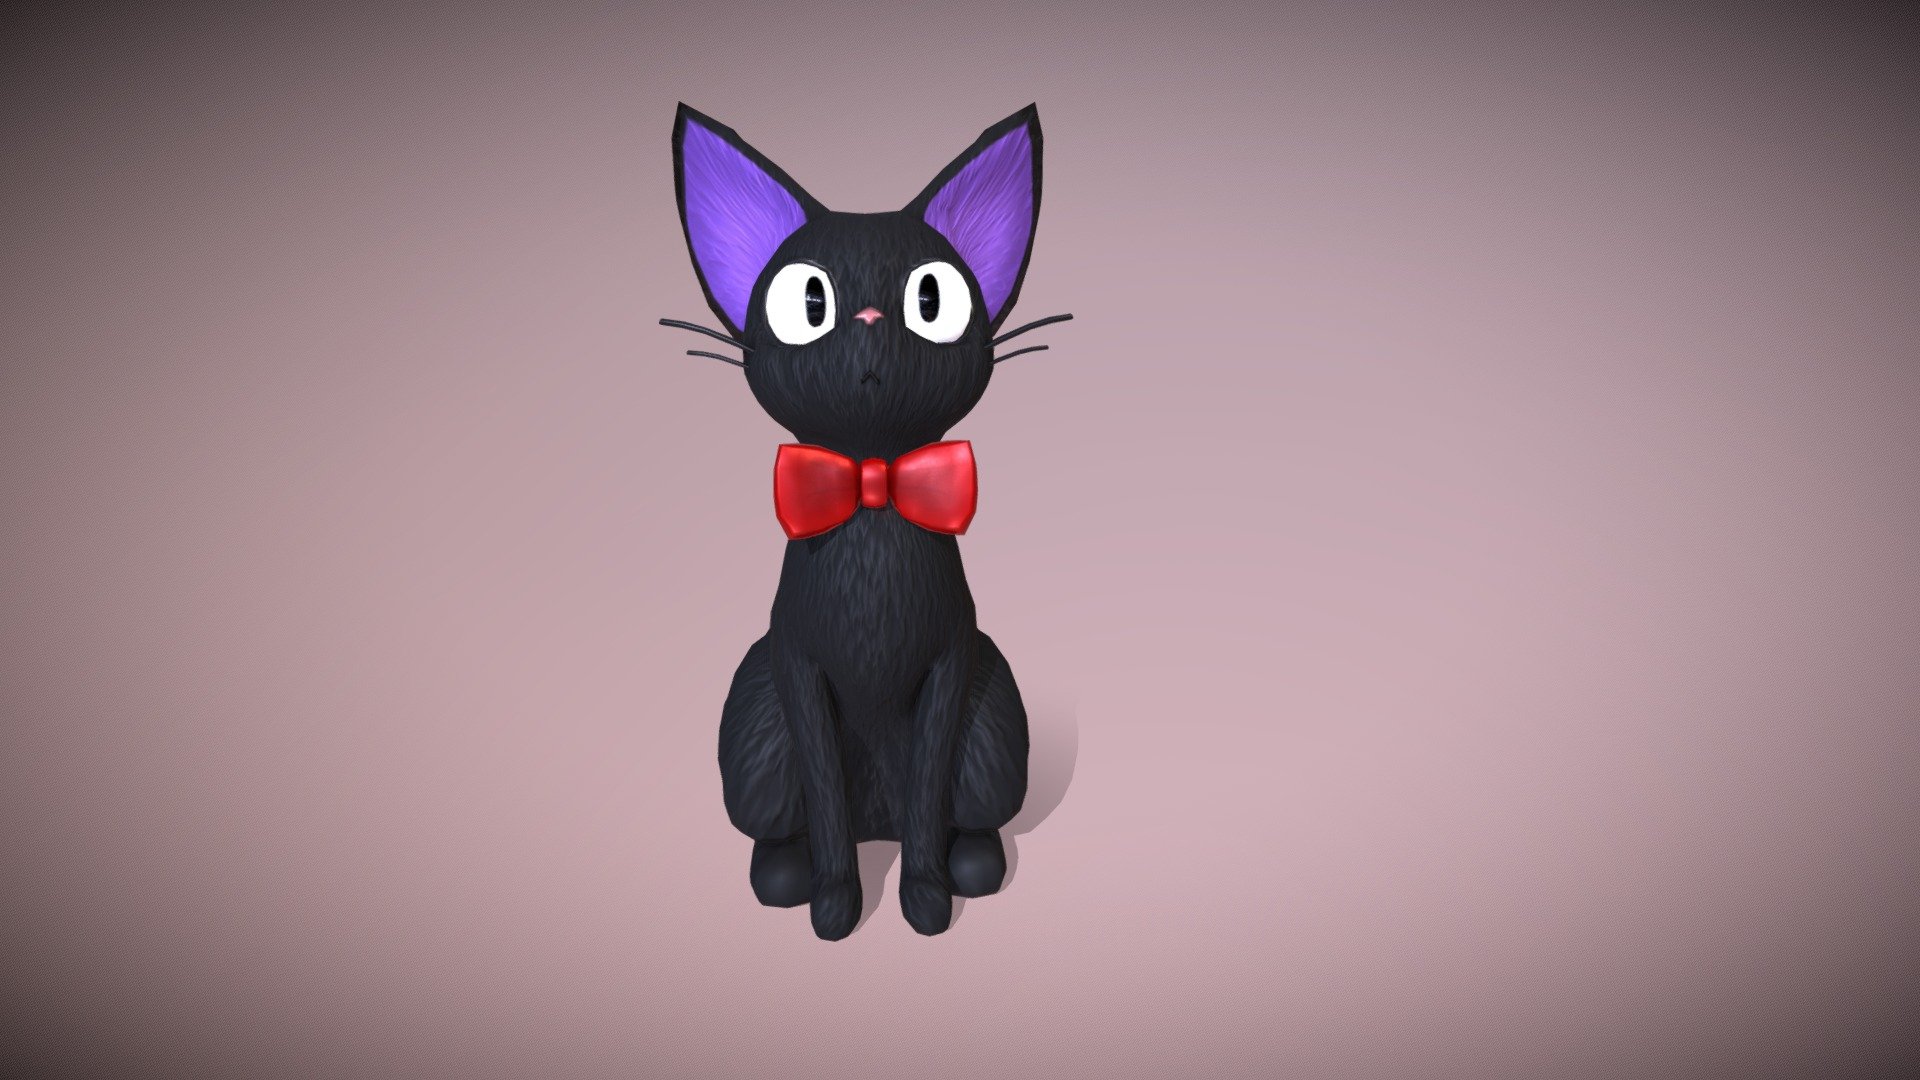 A 3D model of Jiji from Kiki's Delivery Service. I wanted to recreate him in 3D and I think he turned out quite cute 3d model